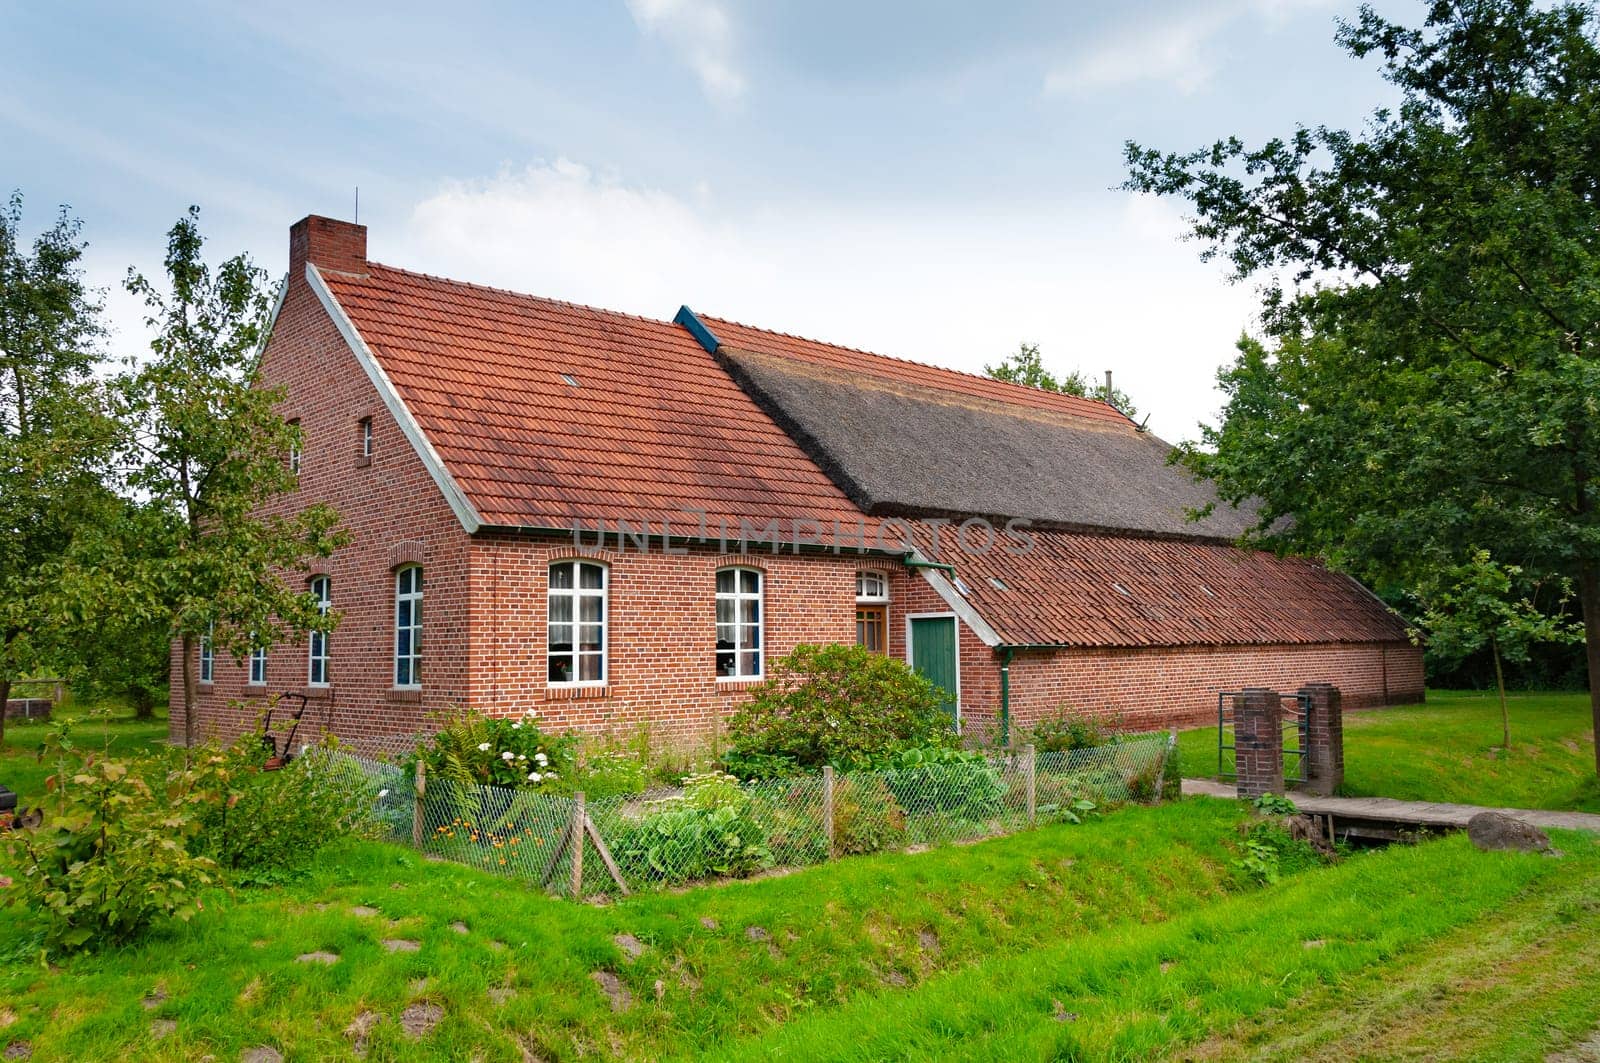 Cozy german house. Old german country red house.